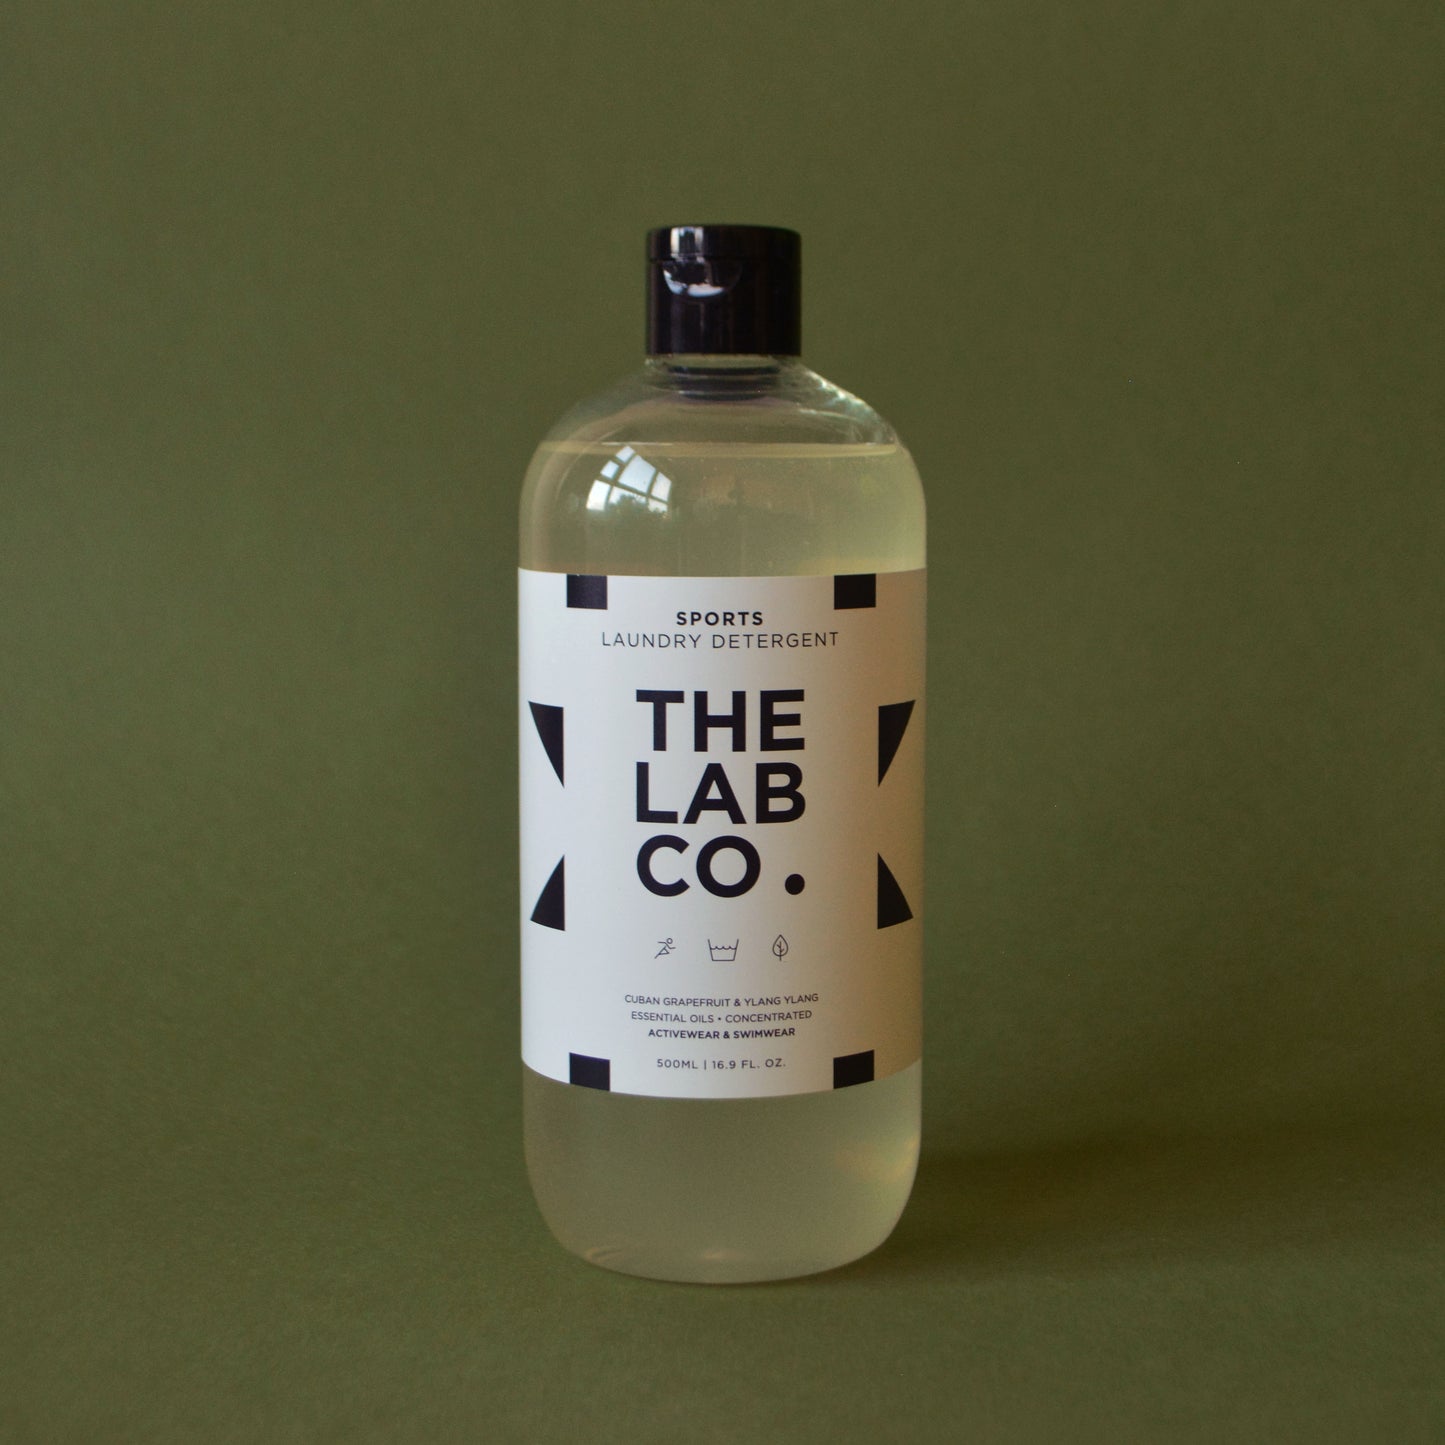 The Lab Co. | Sports Laundry Detergent